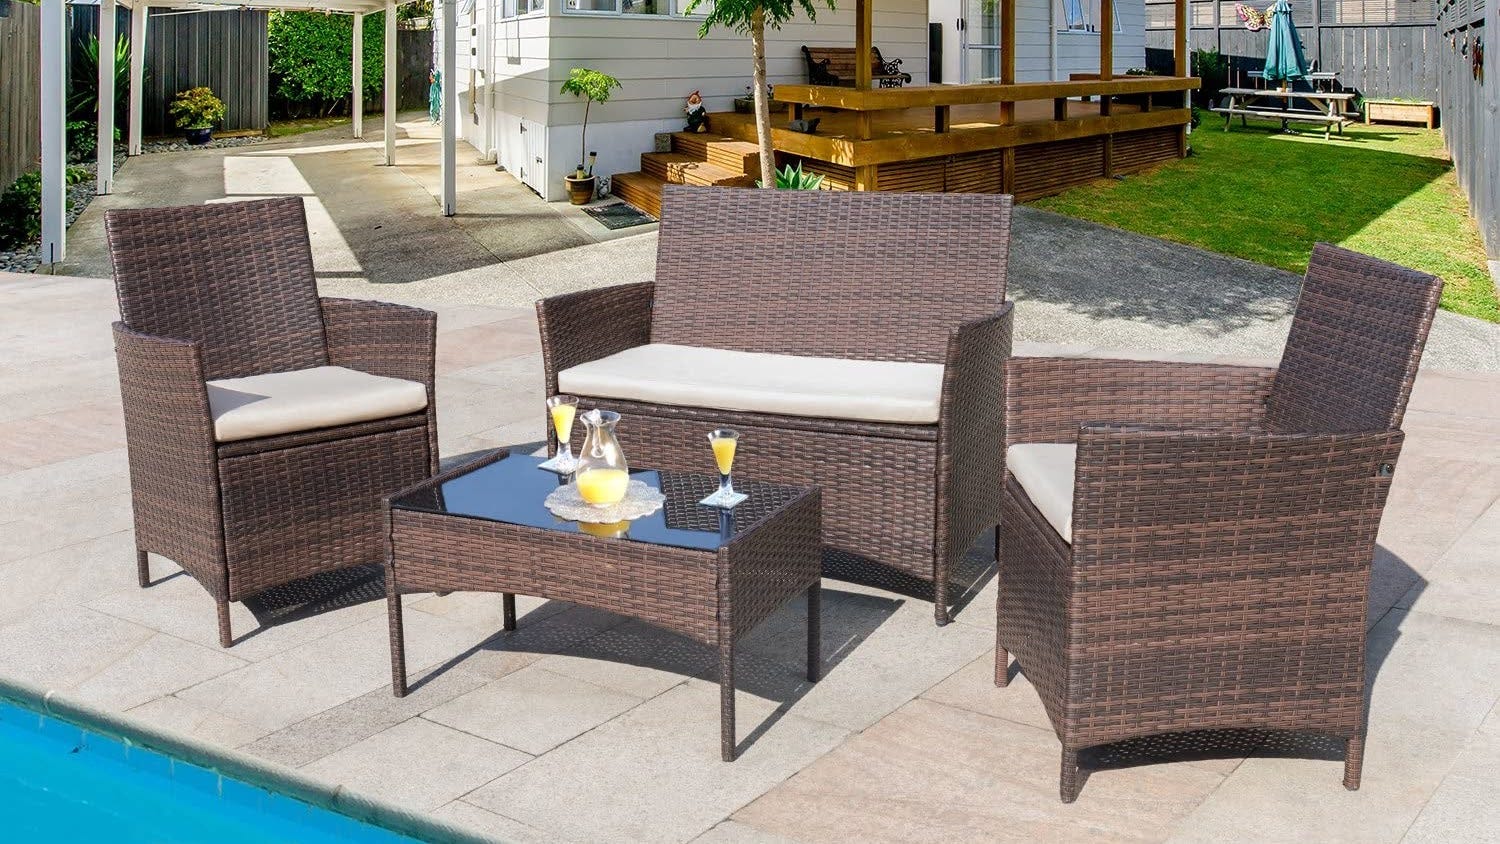 Grey CASTAIN Rattan Garden Furniture Set Outdoor Lounge Poolside Family Lawn Furniture 4 Piece Set Table Chair Sofa Patio